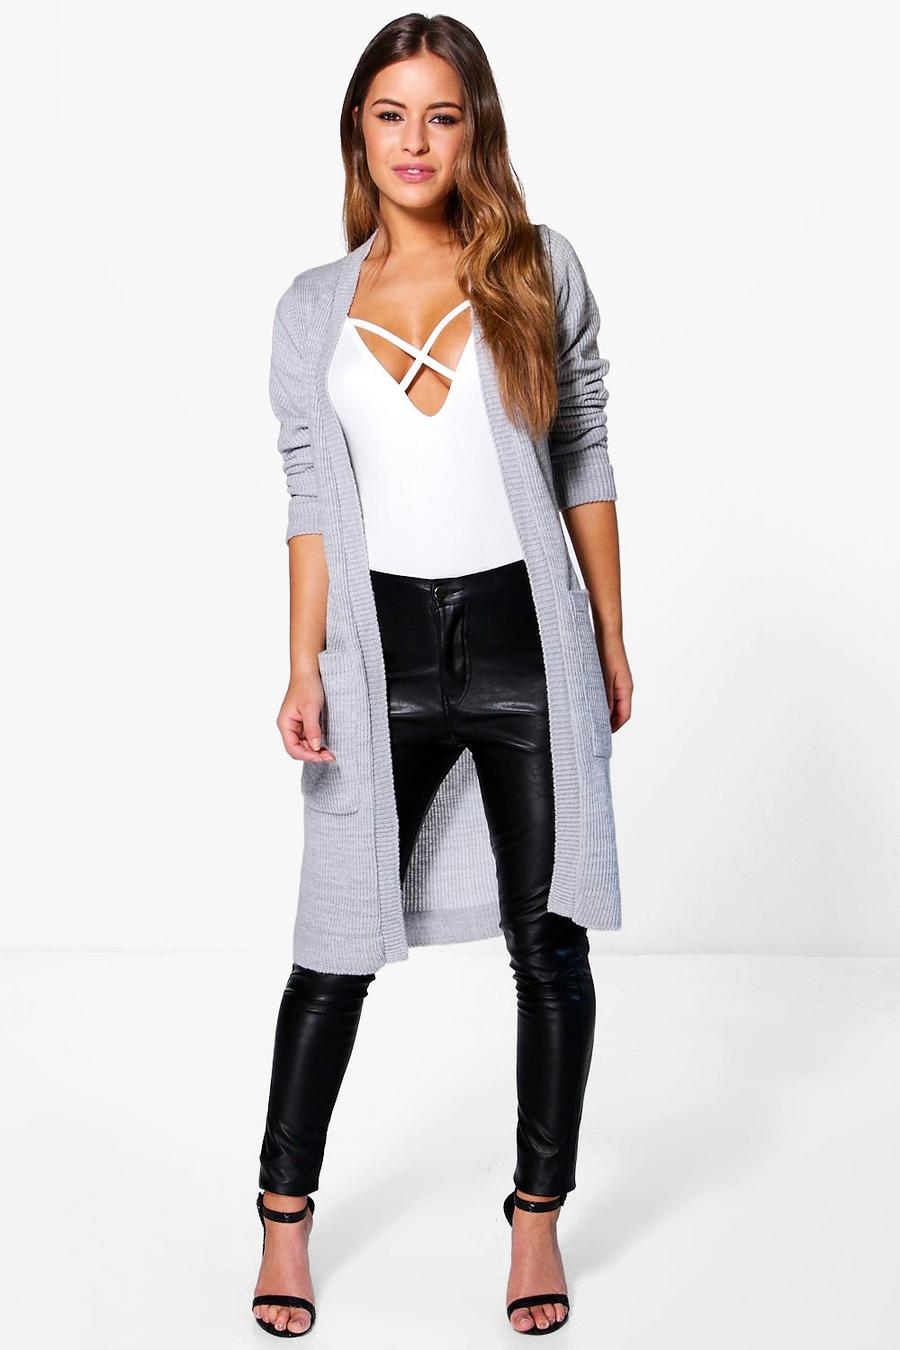 Silver Petite Midi Length Cardigan With Pockets image number 1